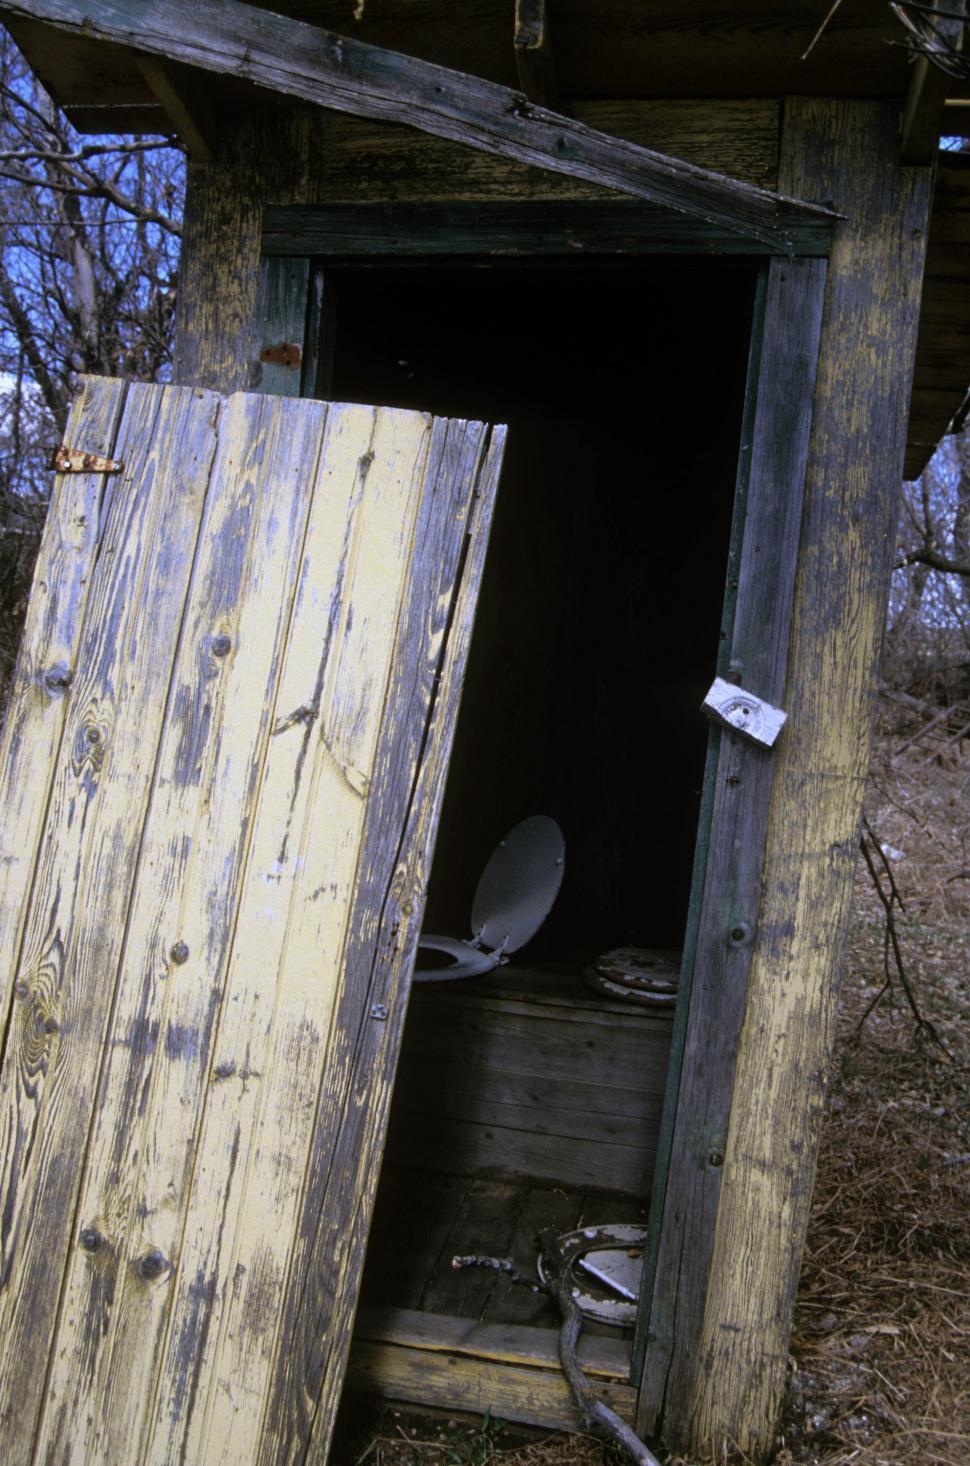 Free Image of Outhouse 